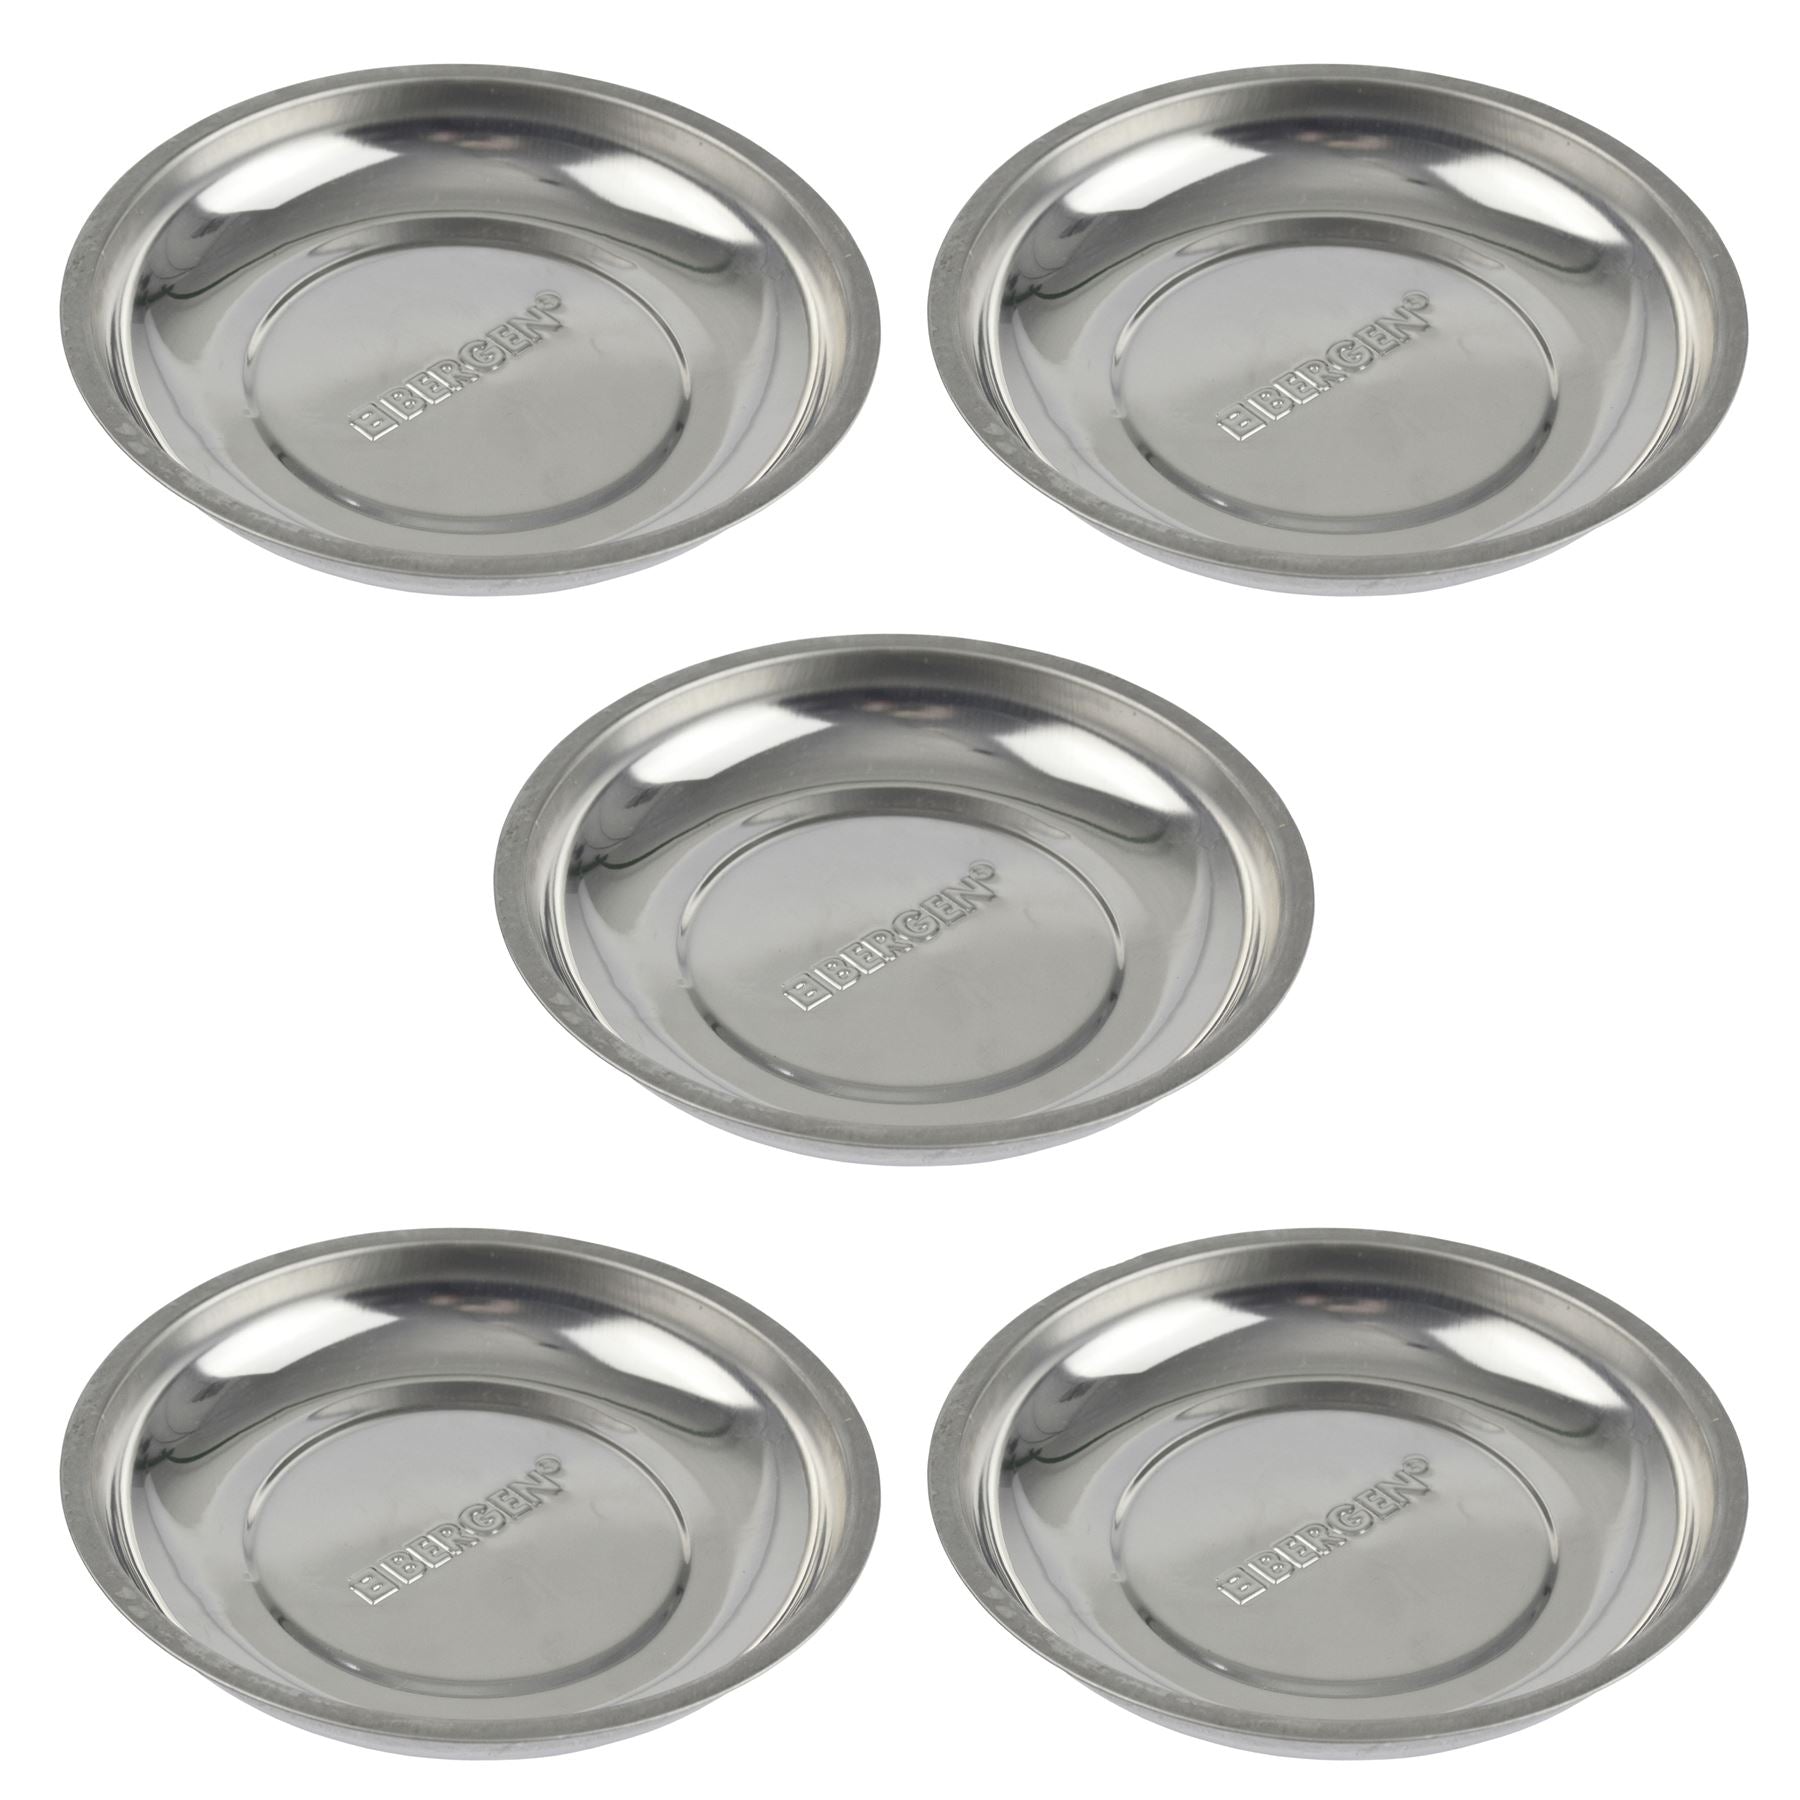 Magnetic Parts Tray Dishes Storage Holder Circular Round Stainless Steel 6"